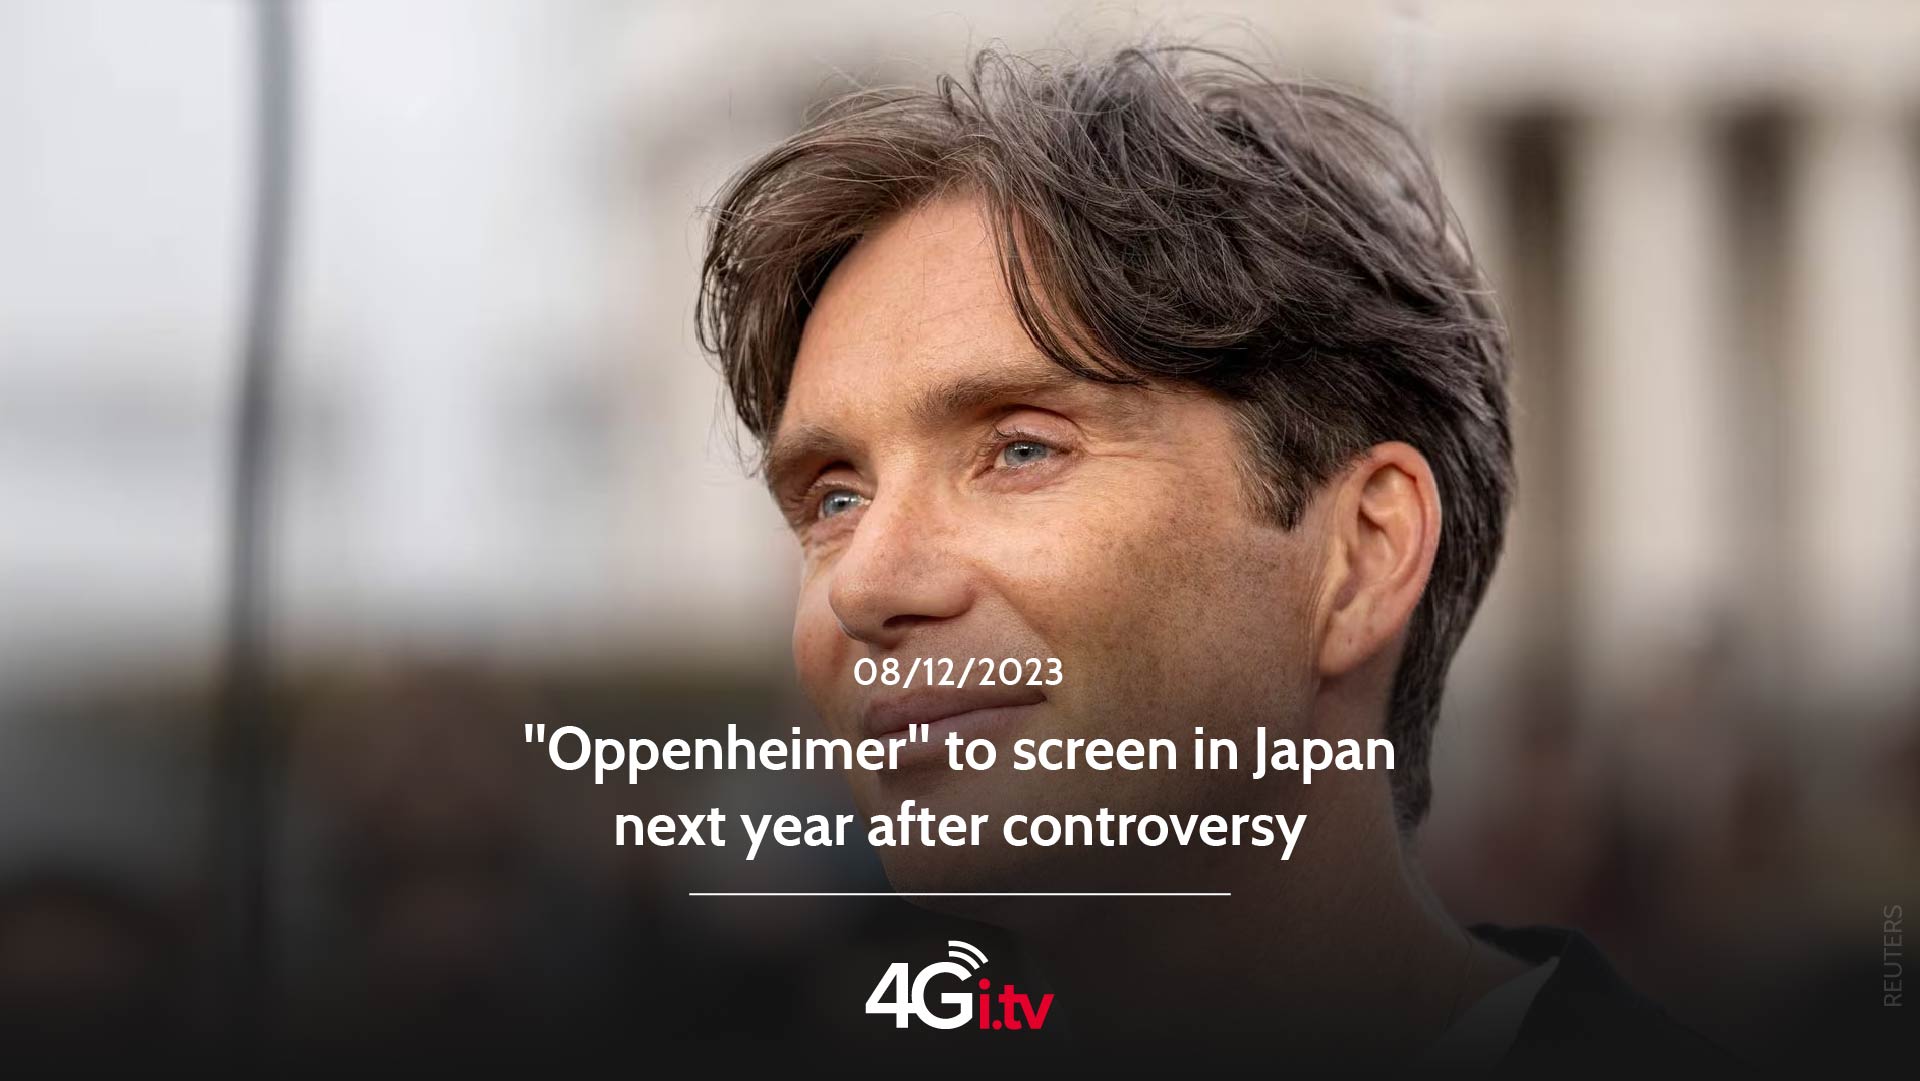 Подробнее о статье “Oppenheimer” to screen in Japan next year after controversy